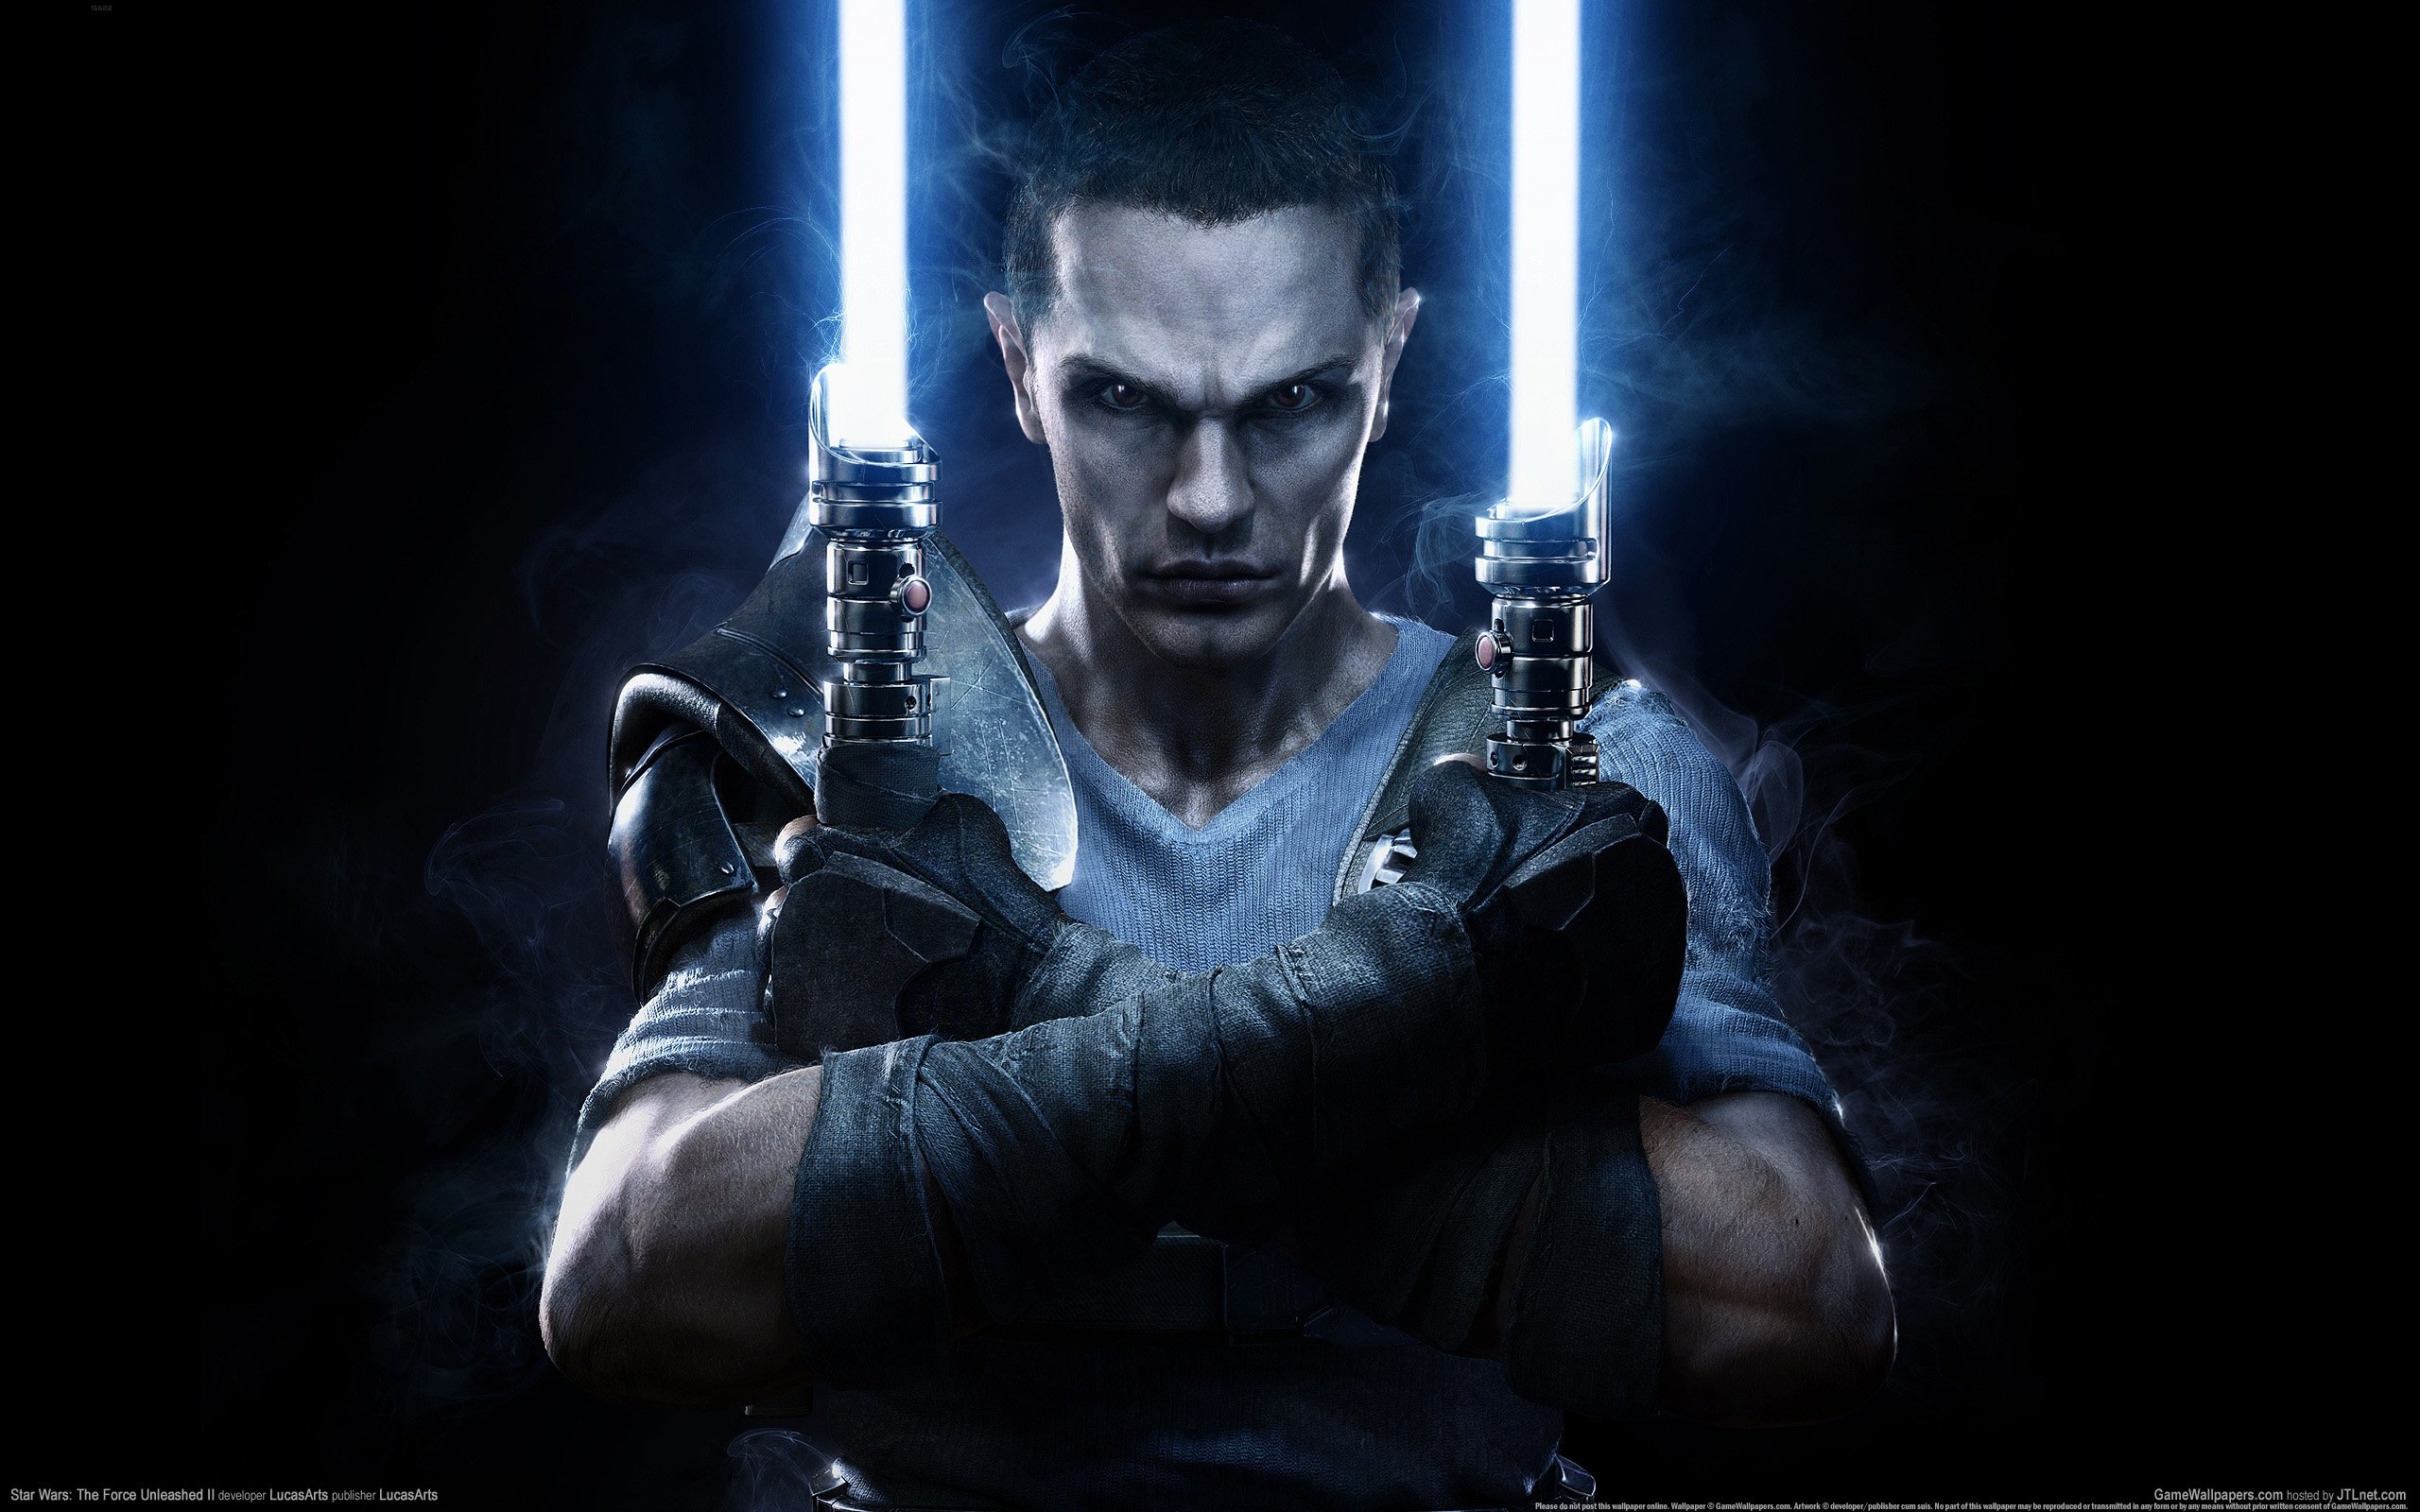 star, Wars, Force, Unleashed, Sci fi, Futuristic, Action, Fighting, Warrior, 1swfu Wallpaper